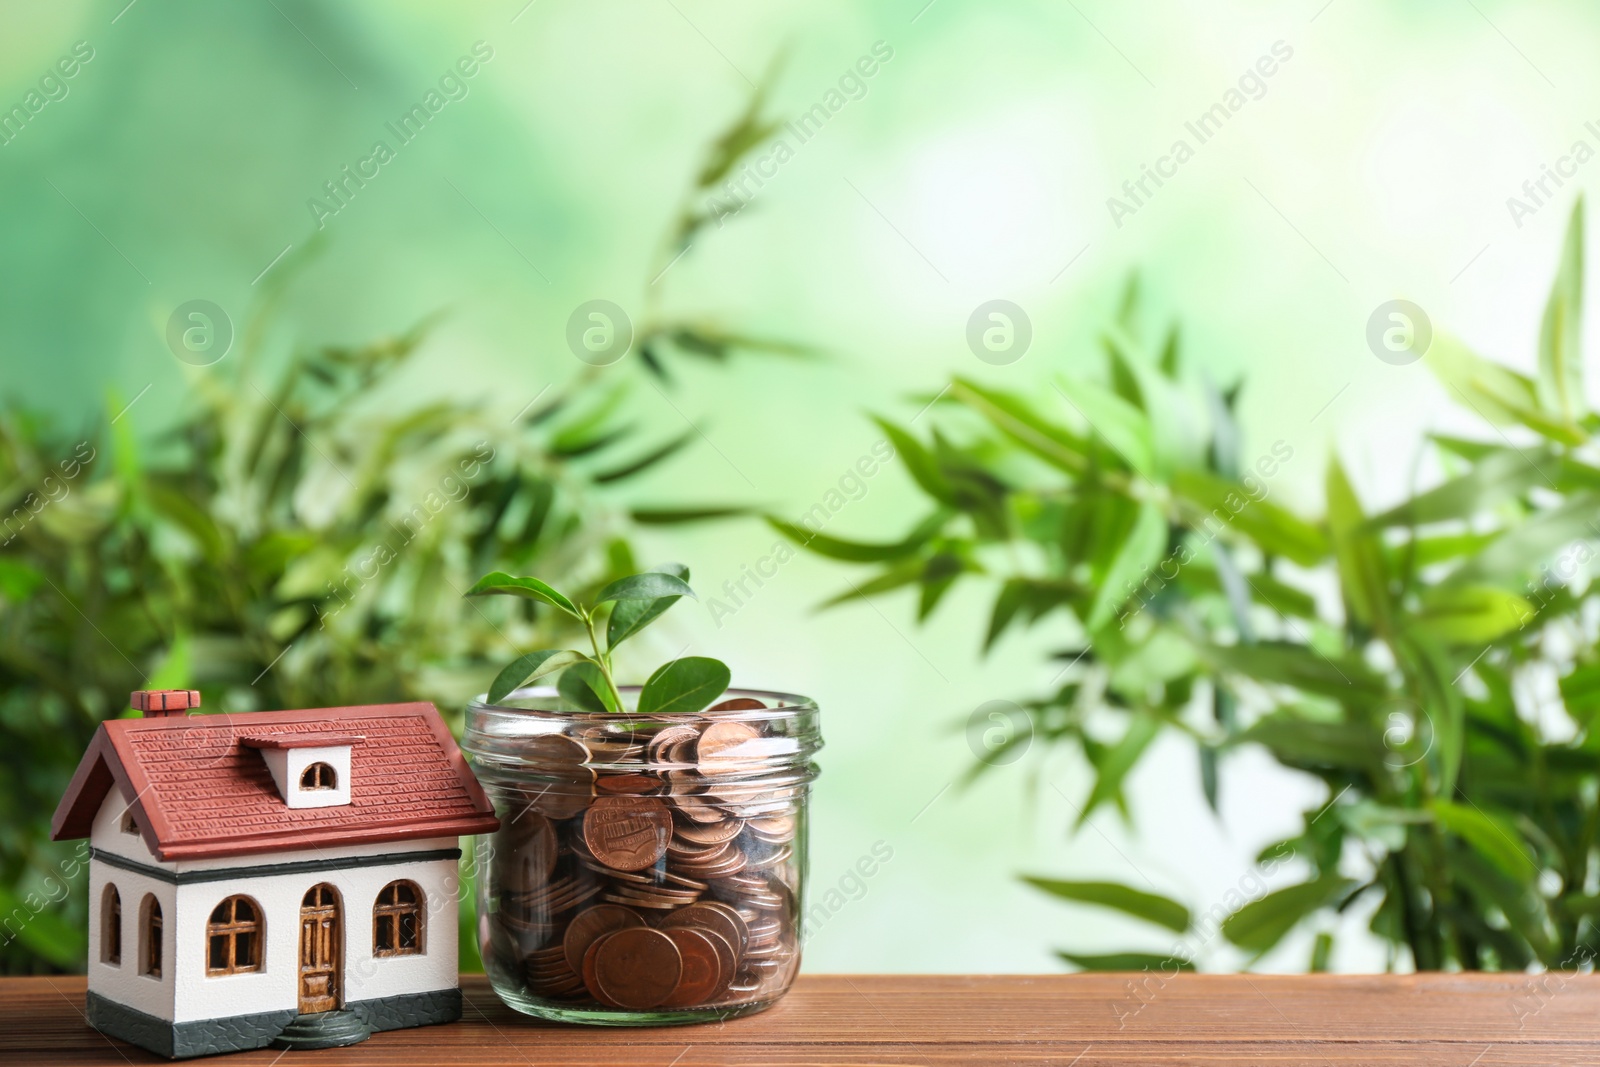 Photo of House model and jar with coins on wooden table against blurred background. Space for text